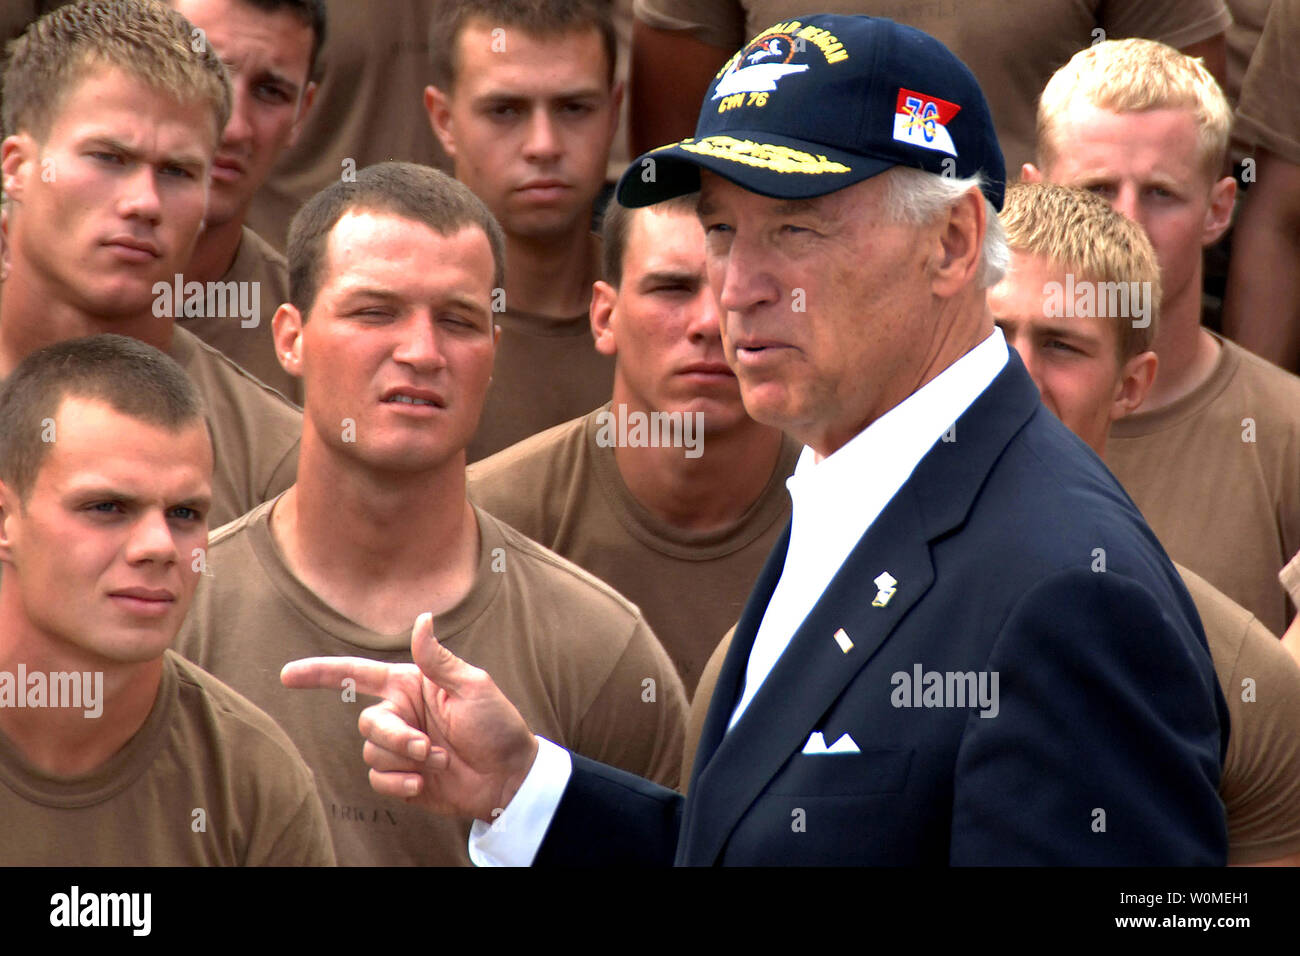 Vice President Joe Biden talks with Basic Underwater Demolition/SEAL (BUD/S) candidates on the beach at the Naval Special Warfare Center in San Diego on May 14, 2009. (UPI Photo/Dominique M. Lasco/U.S. Navy) Stock Photo